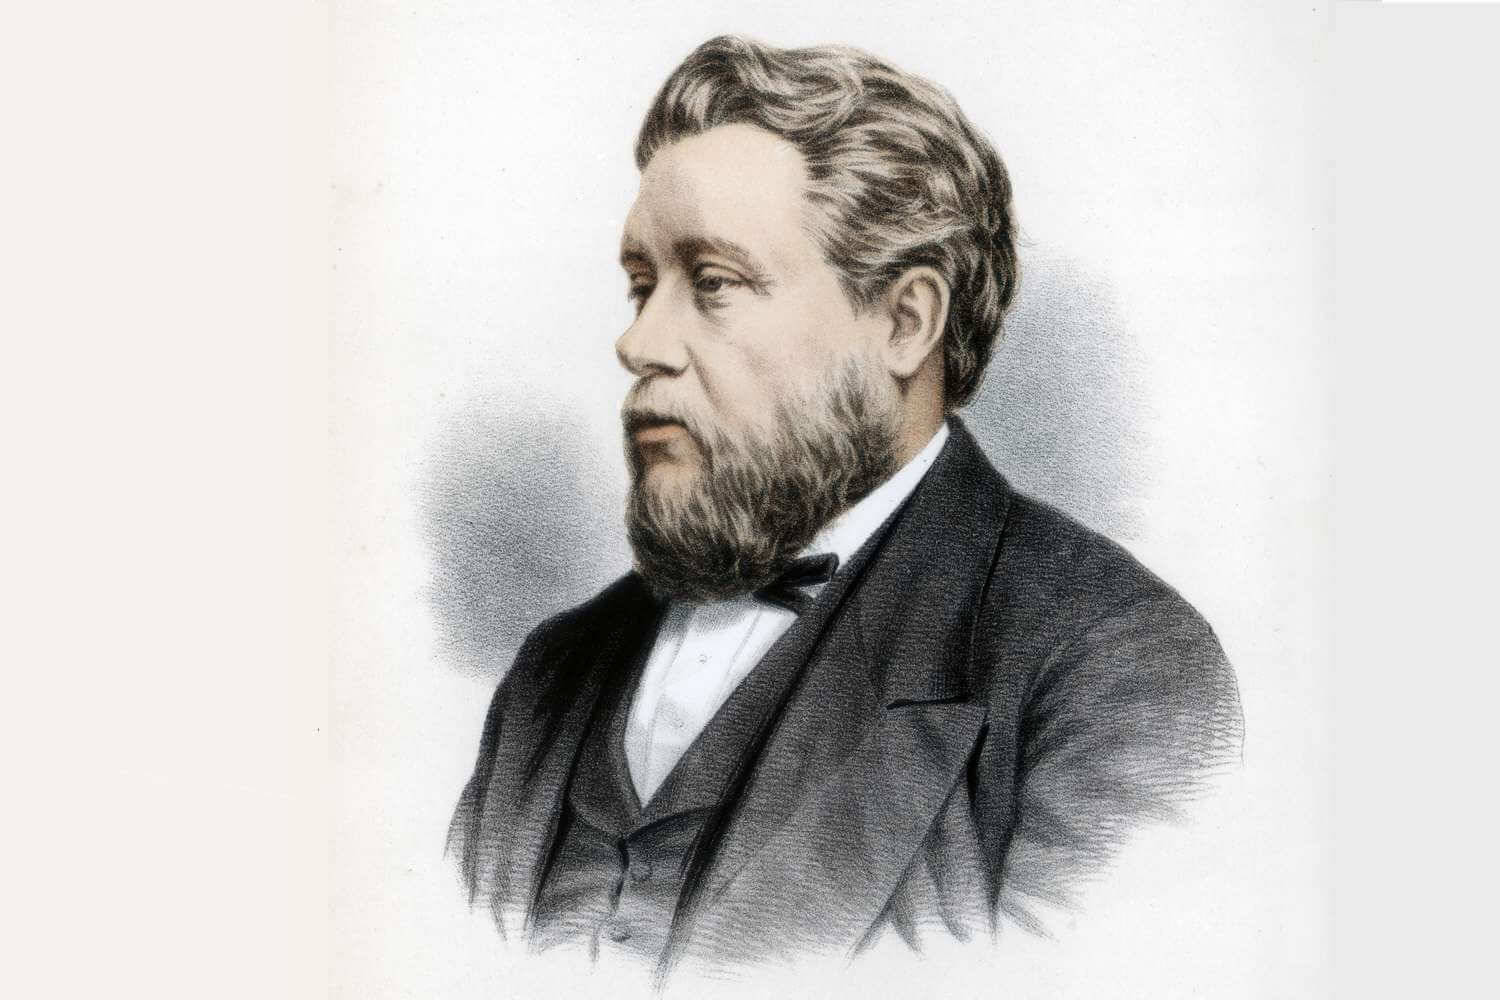 Charles Spurgeon Bible commentary